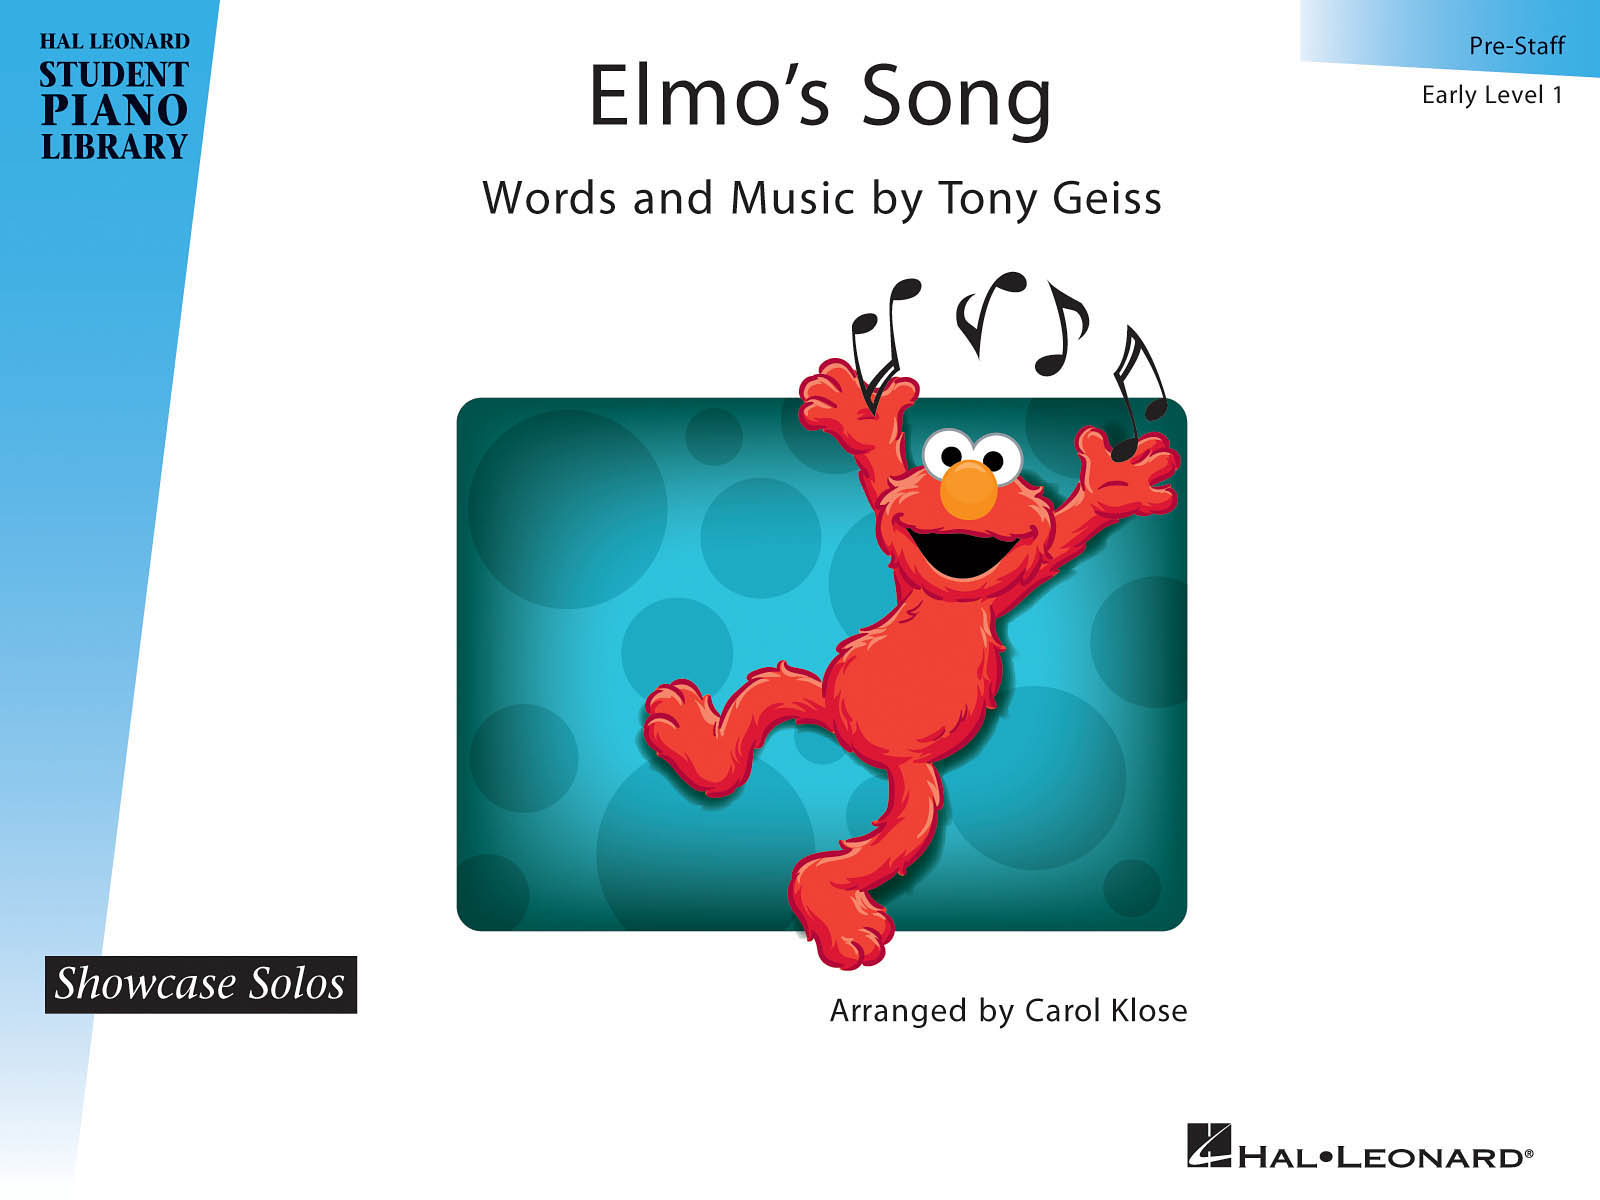 Elmo’s Song(Hal Leonard Student Piano Library Showcase Solos Pre-Staff – Early Level 1)